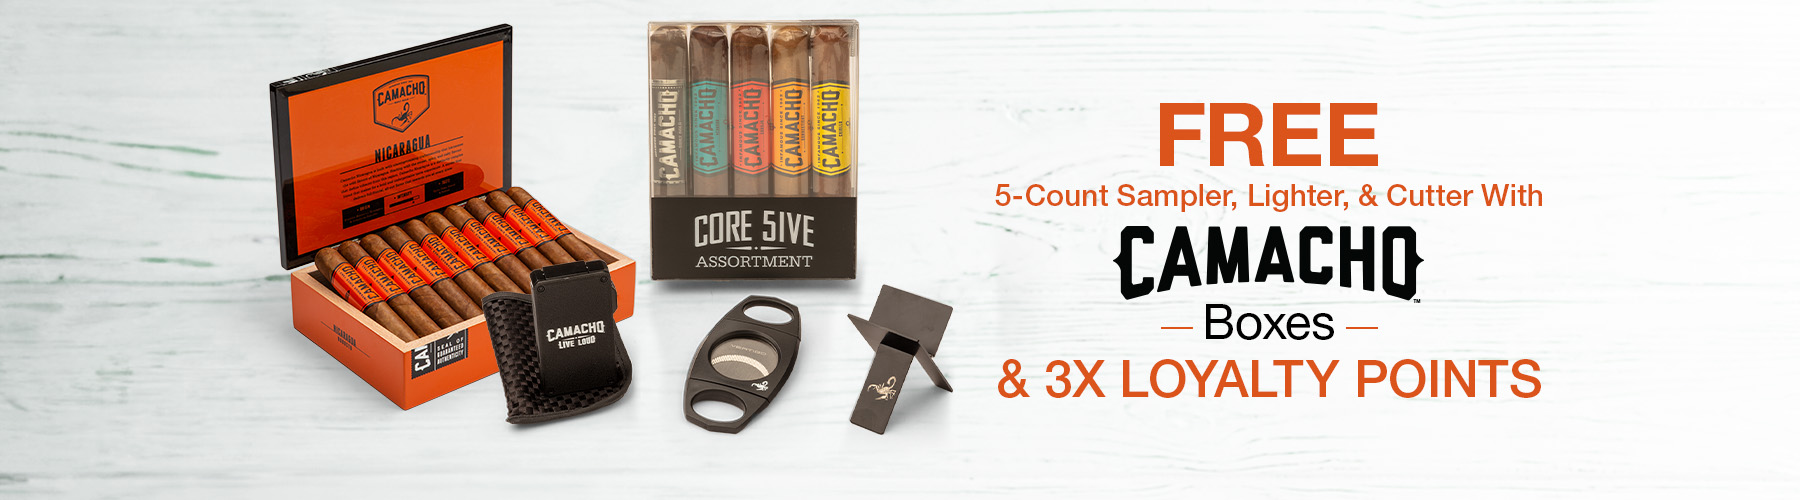 Free 5-Count Sampler, Lighter, and Cutter with Camacho boxes & 3X Loyalty Points!